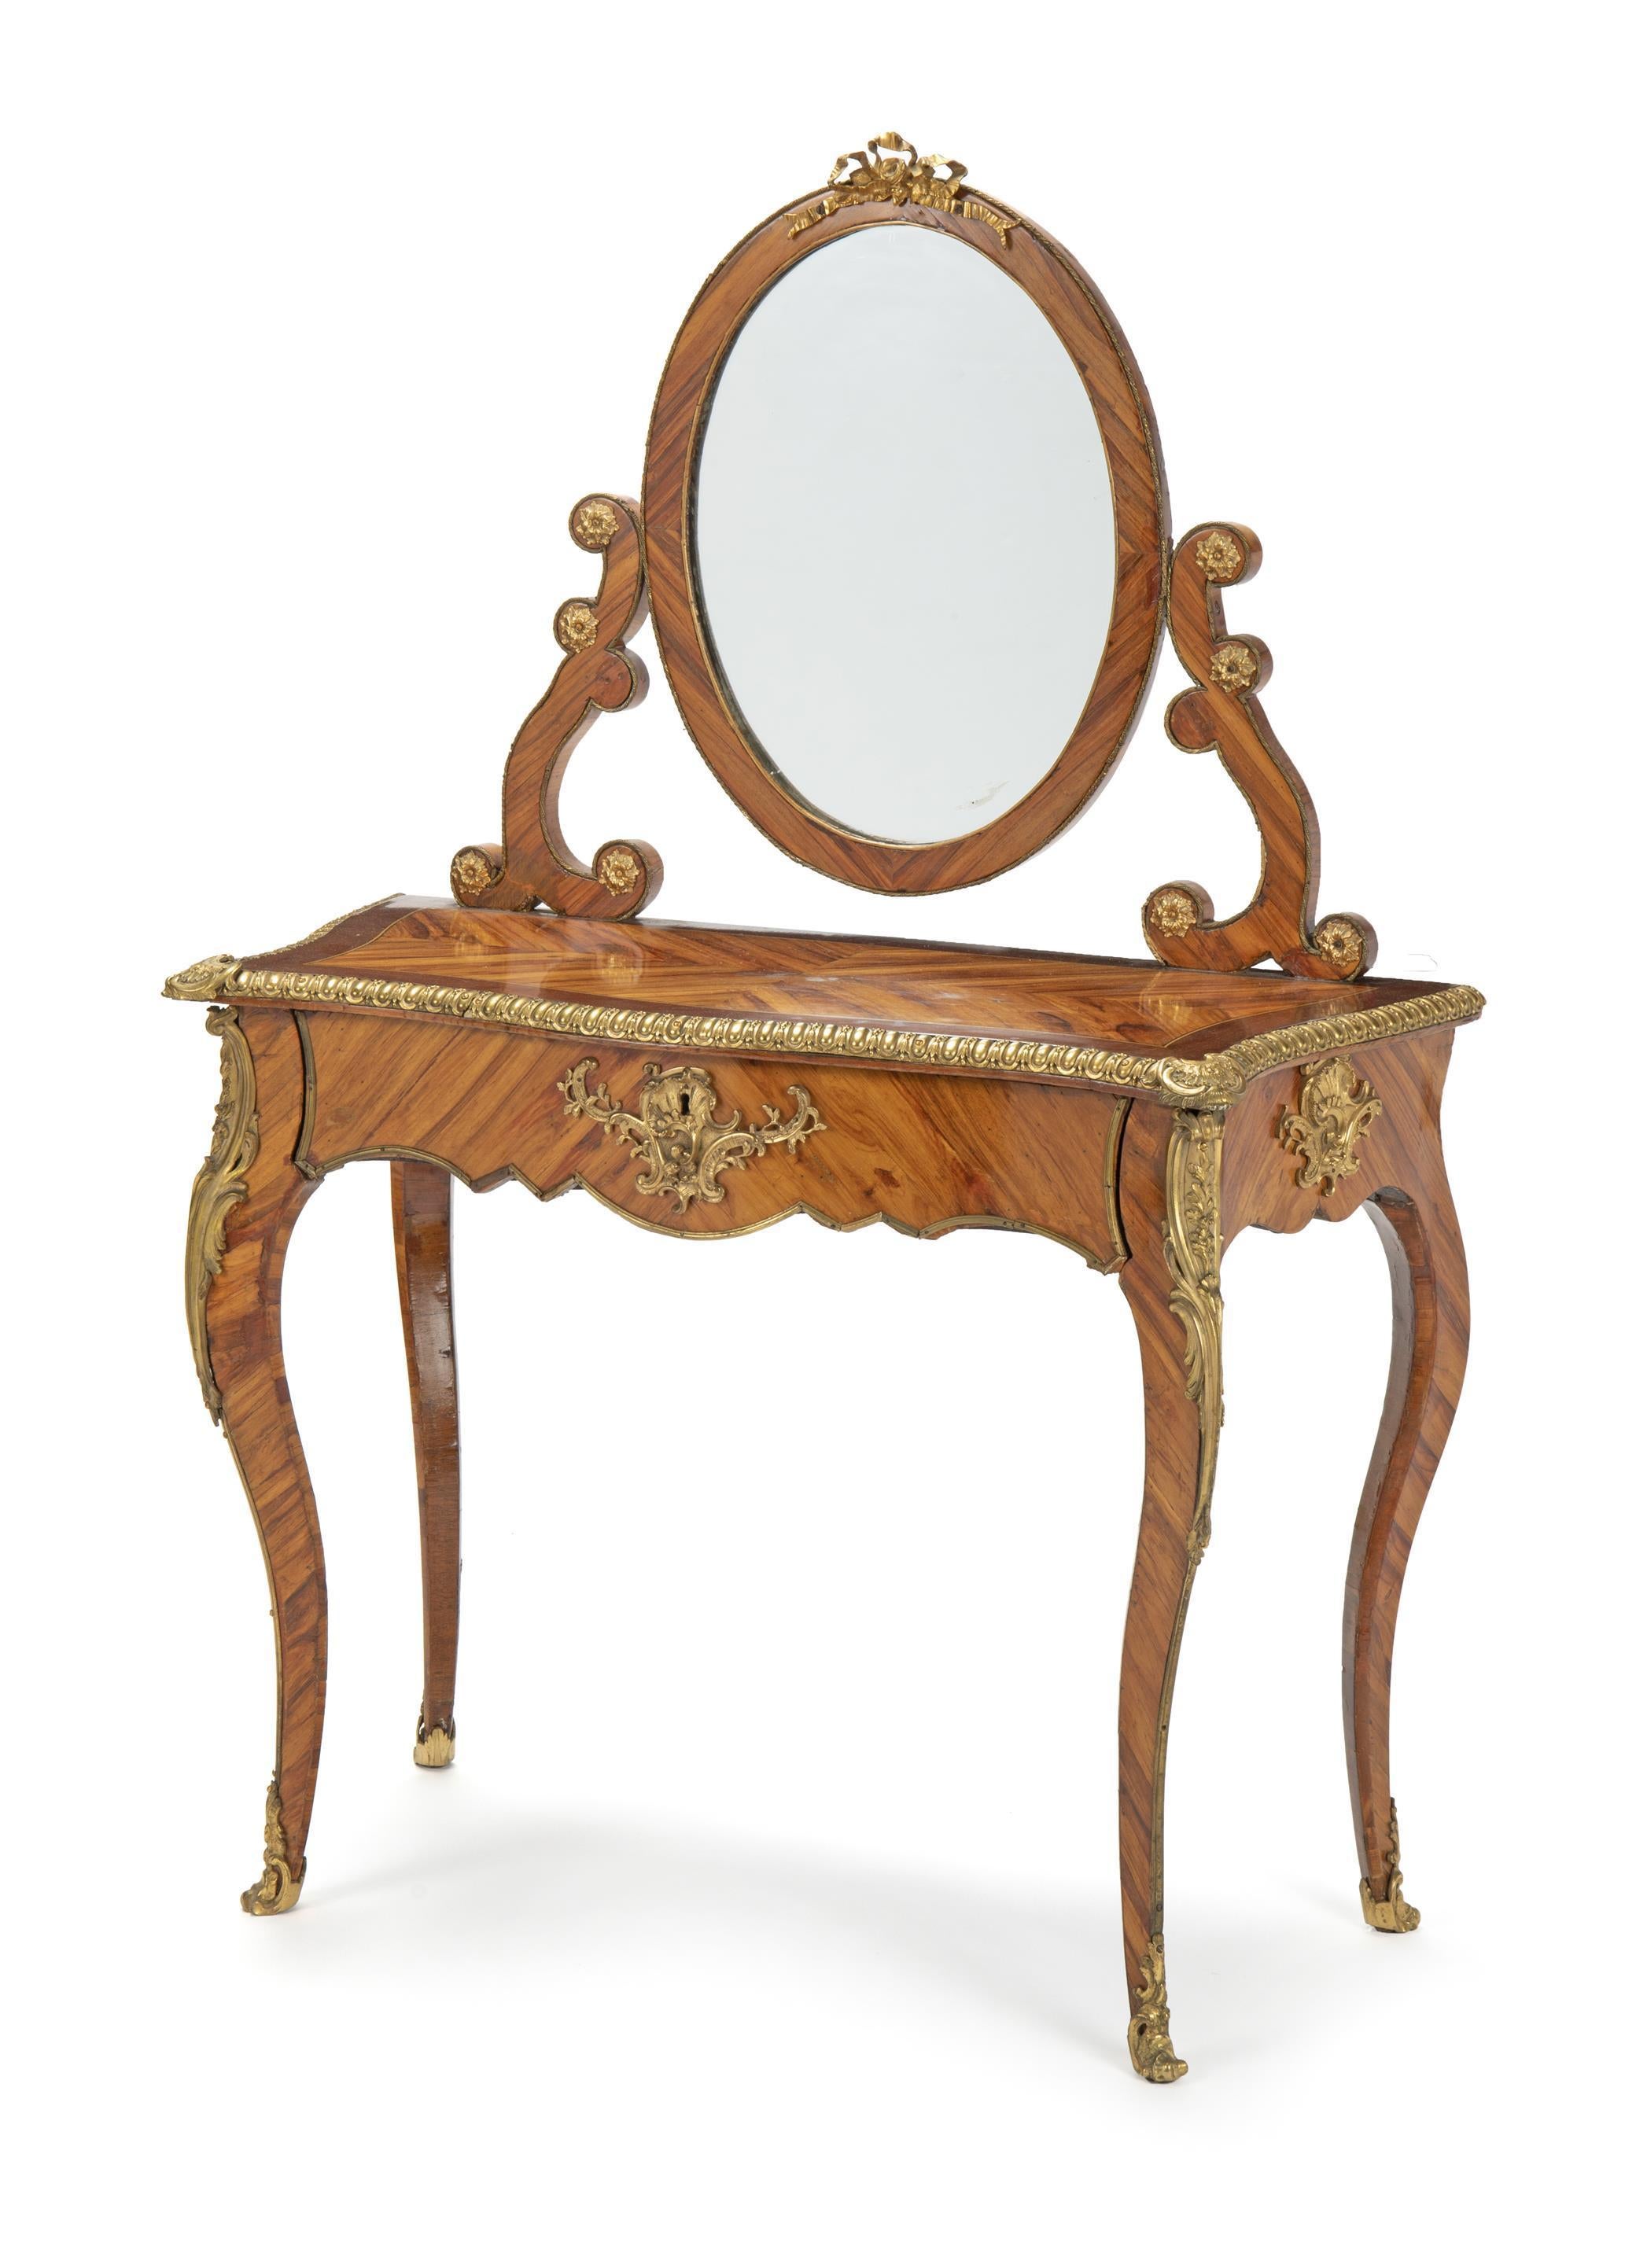 Attractive French Louis XV style kingwood vanities console with mirror.
19th century. 
The console is surmounted with an oval bronze mounted vanity mirror, supported by two carved scrolls with rosettes, above a moulded parquetry kingwood veneered